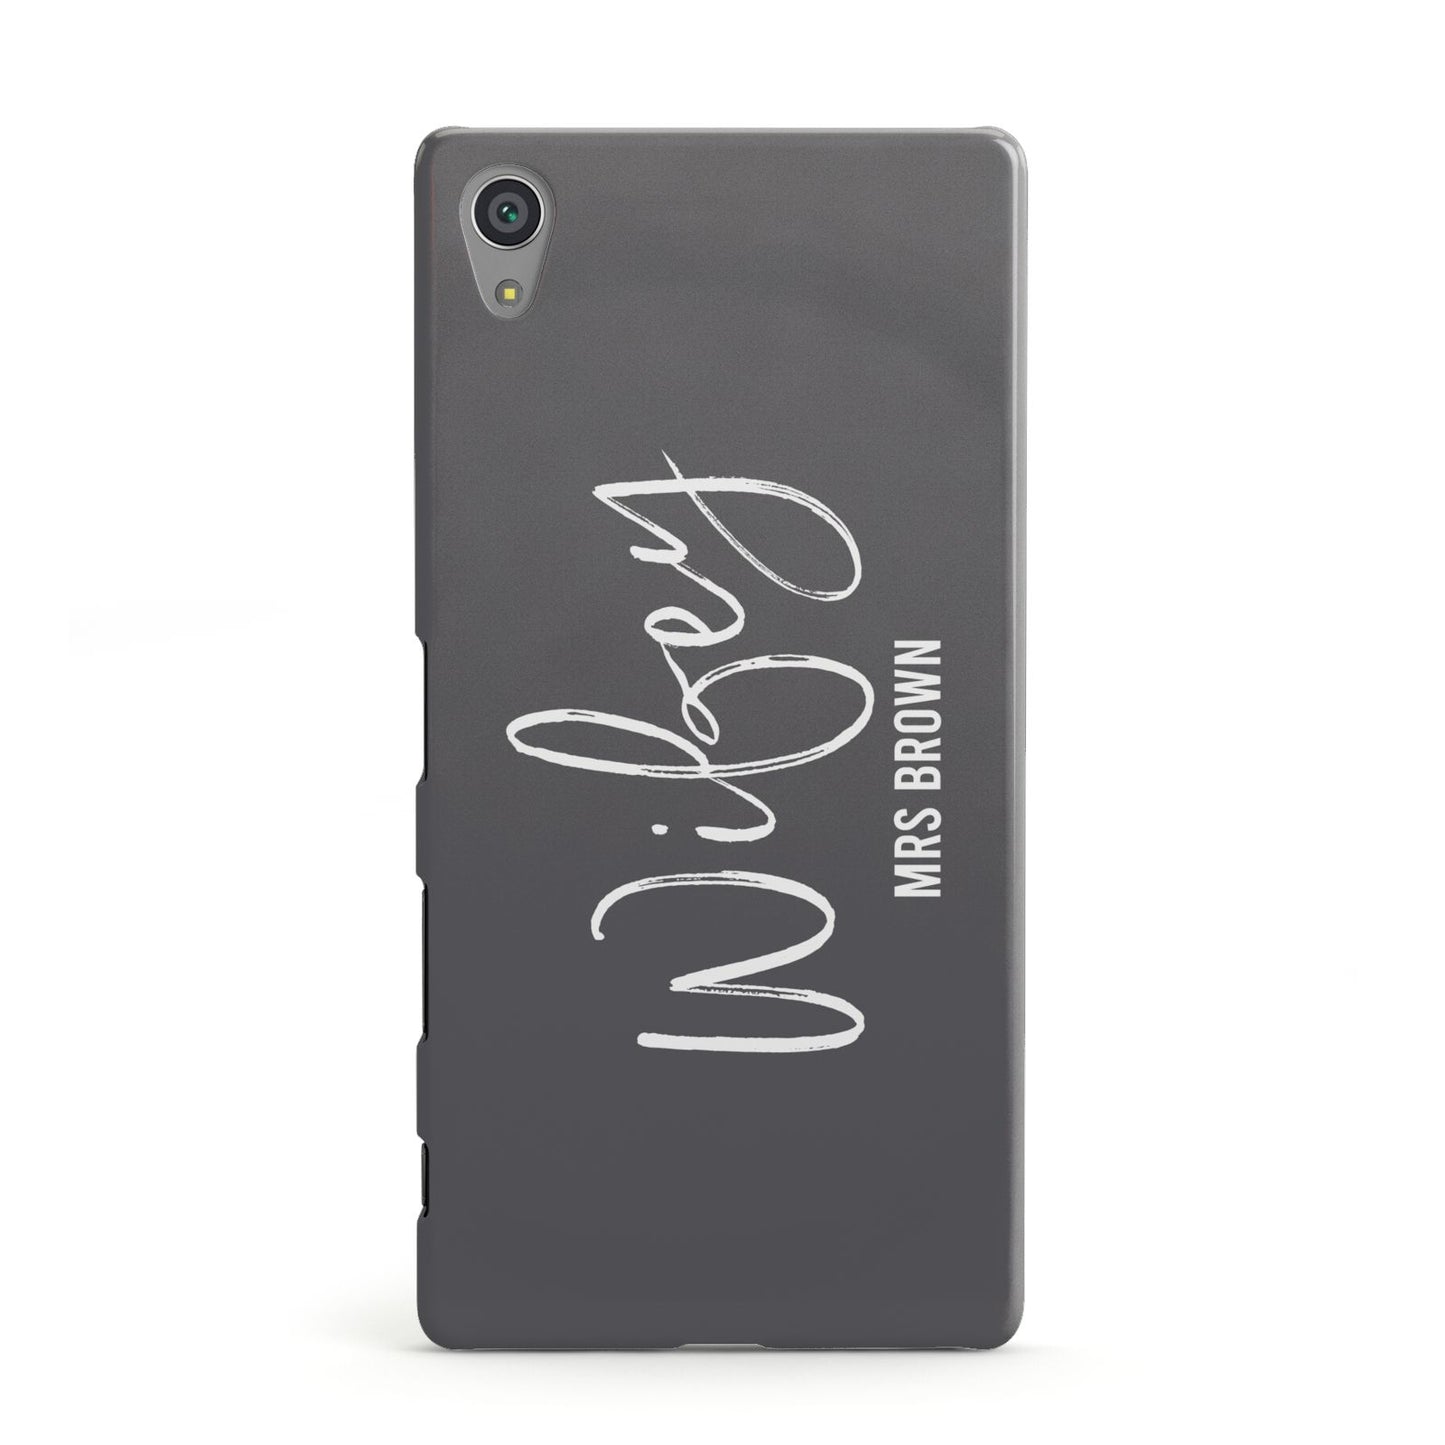 Personalised Wifey Sony Xperia Case